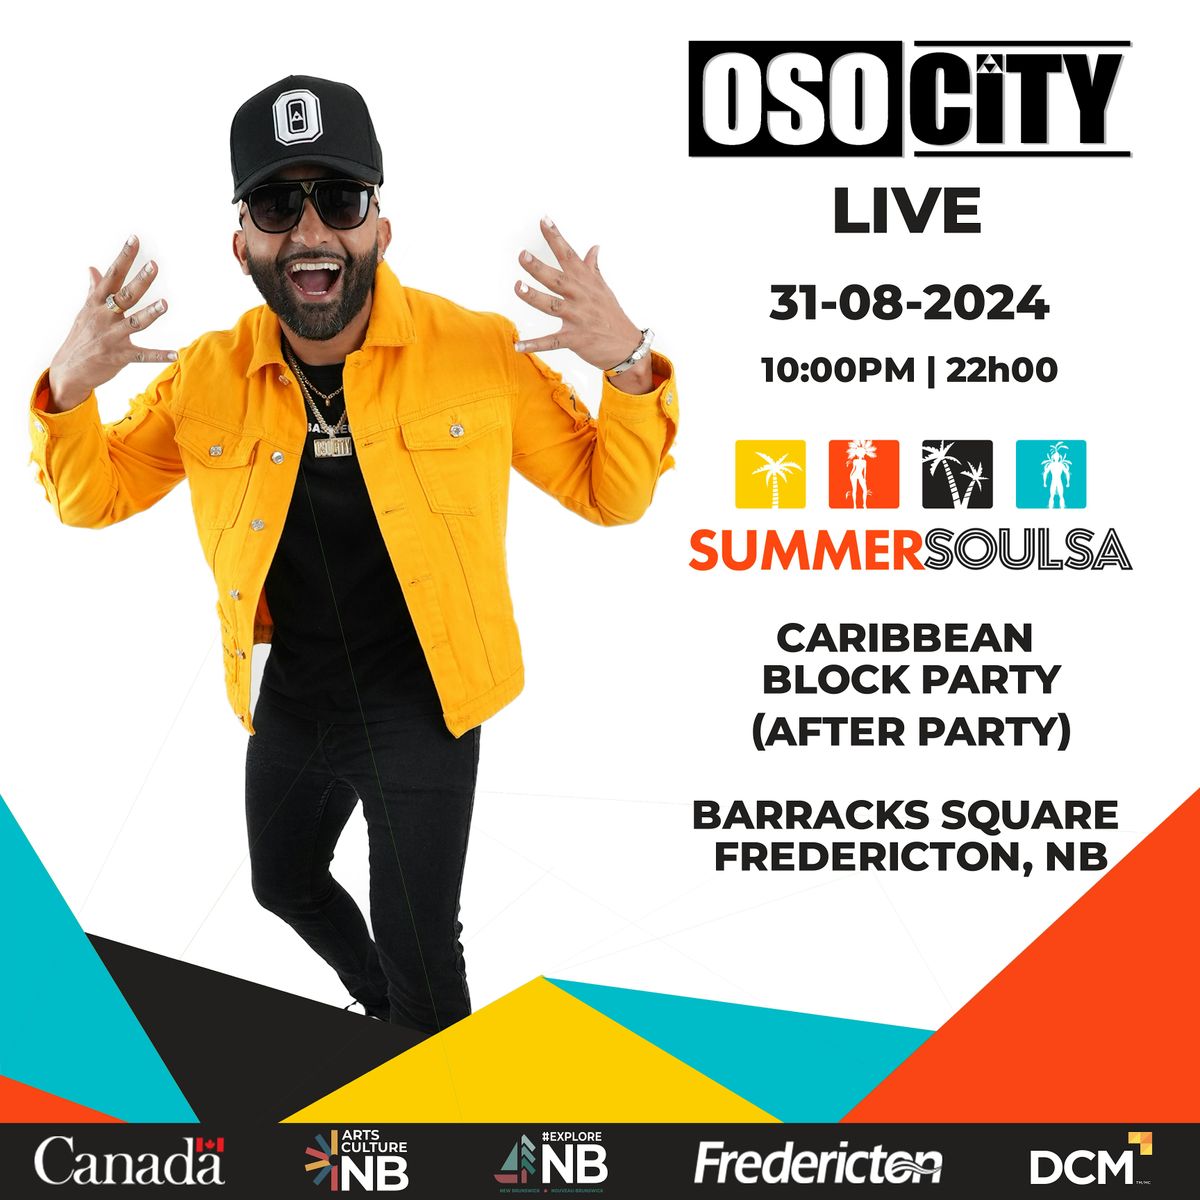 Caribbean Block Party (After Party) Ft Osocity